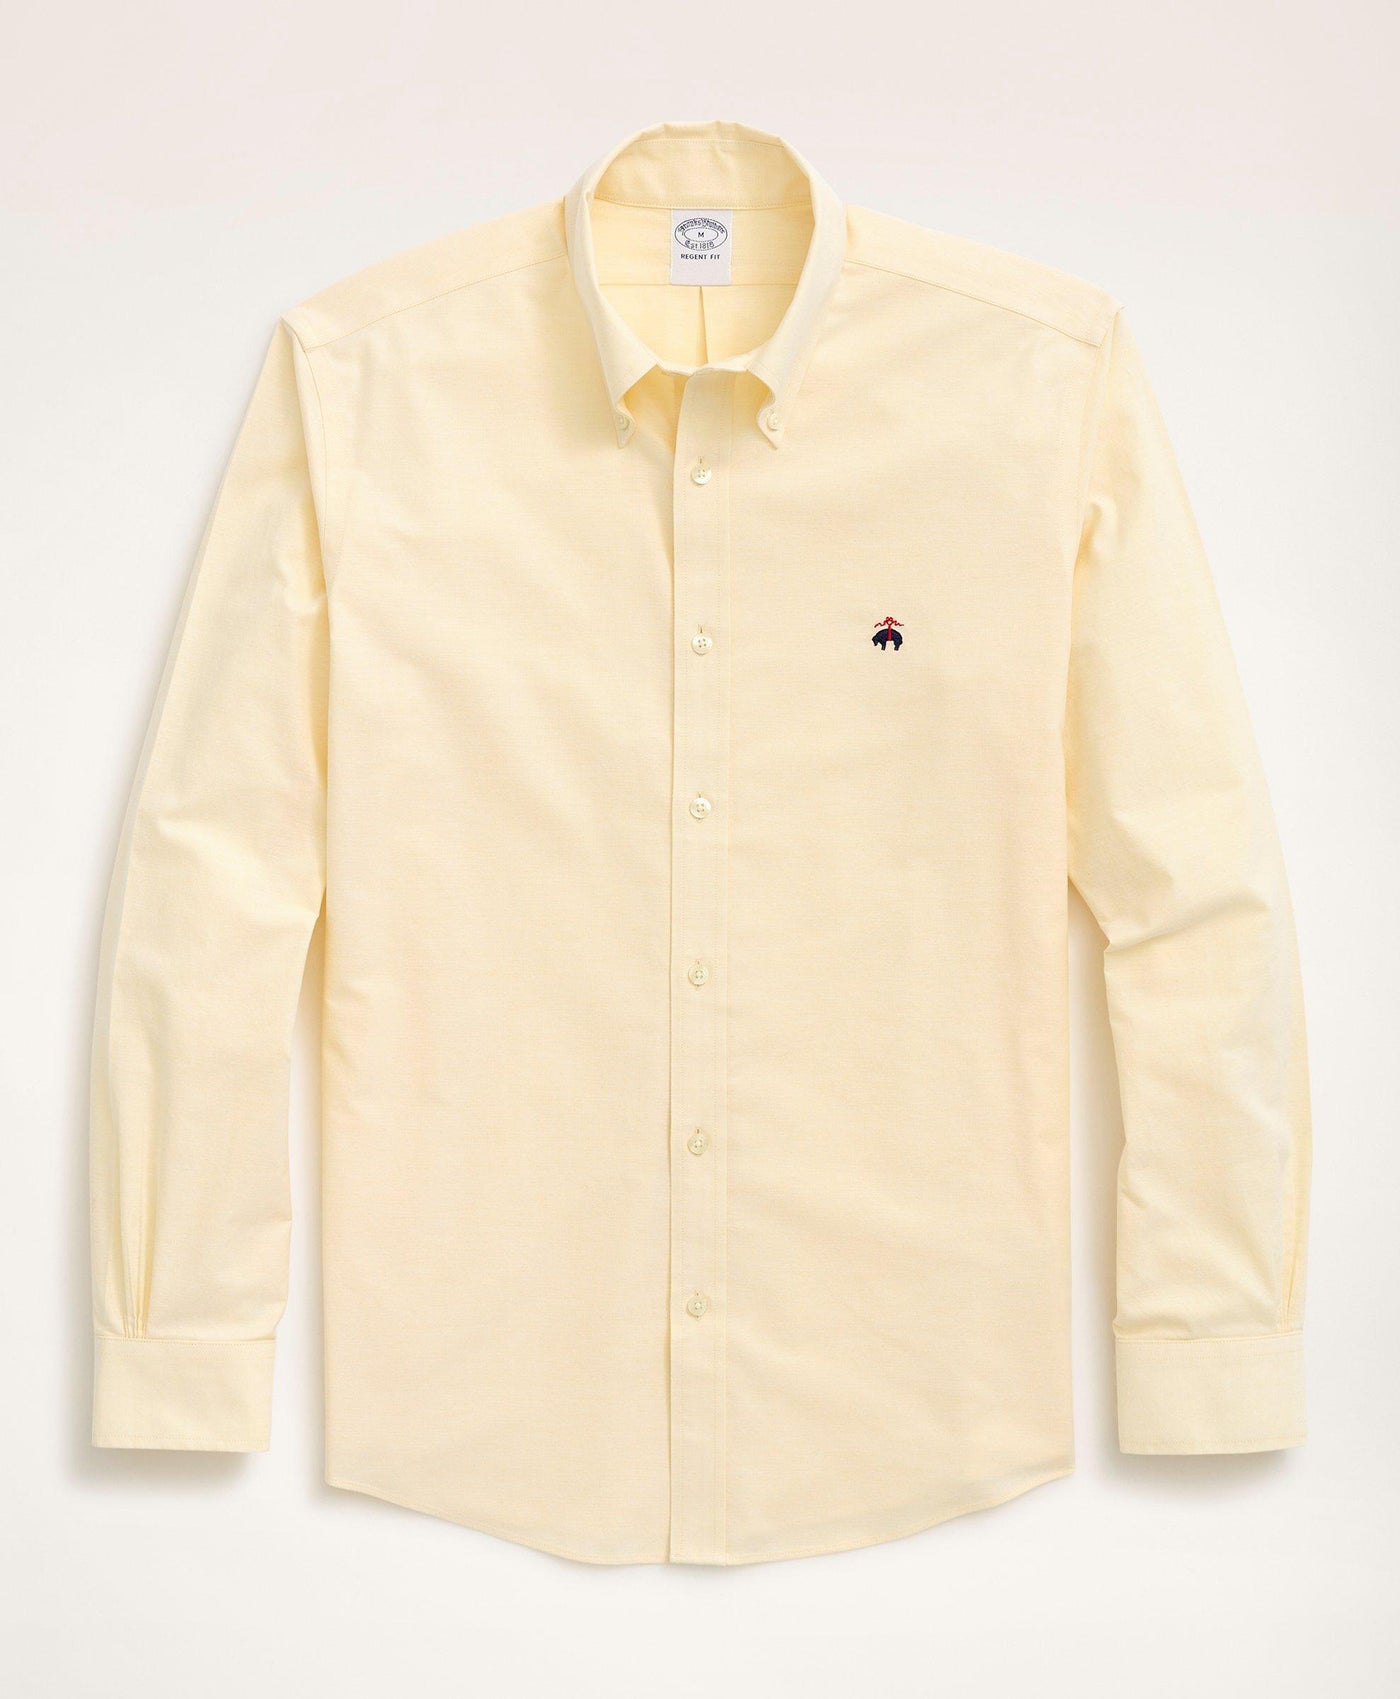 Stretch Regent Regular-Fit Sport Shirt, Non-Iron Oxford Button Down Collar - Brooks Brothers Canada